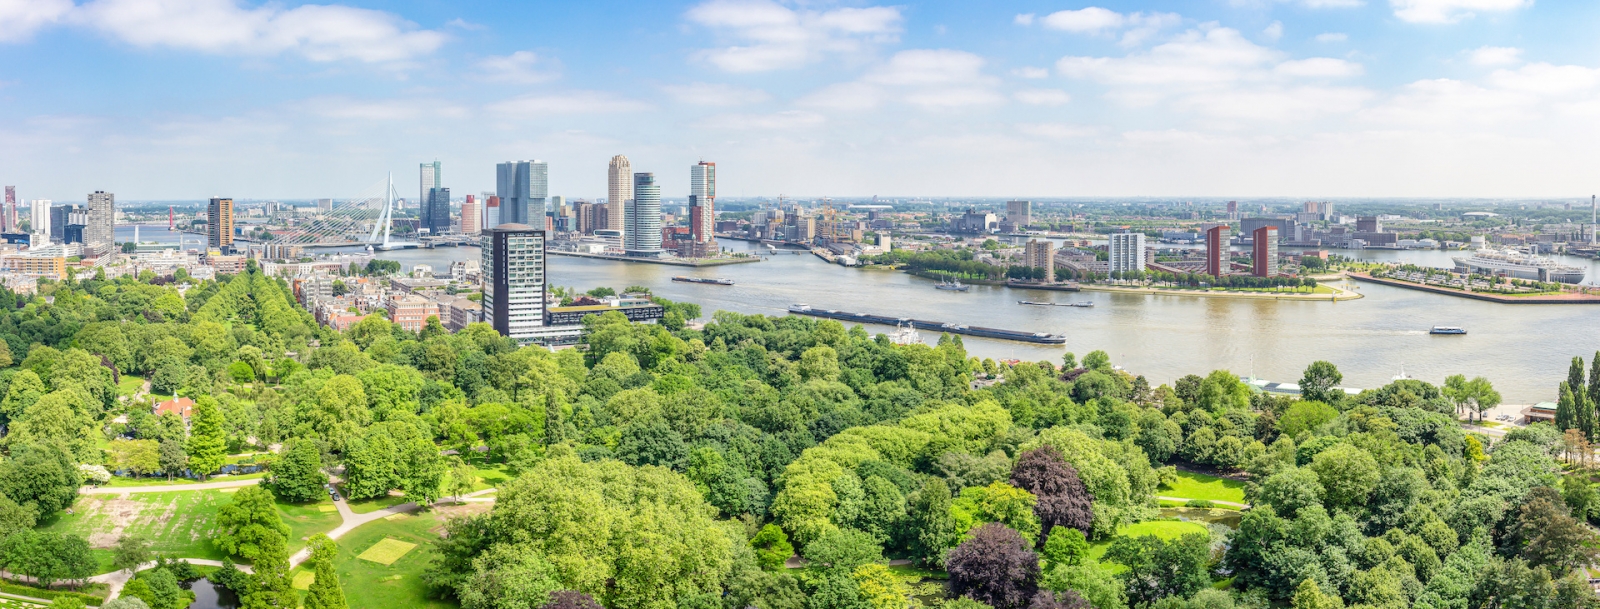 Panoramic view of Rotterdam with the river Maas and the Erasmus bridge, the park at the Euromast, the buildings at the Cruise Terminal and Hotel New York, Katendrecht with SS Rotterdam